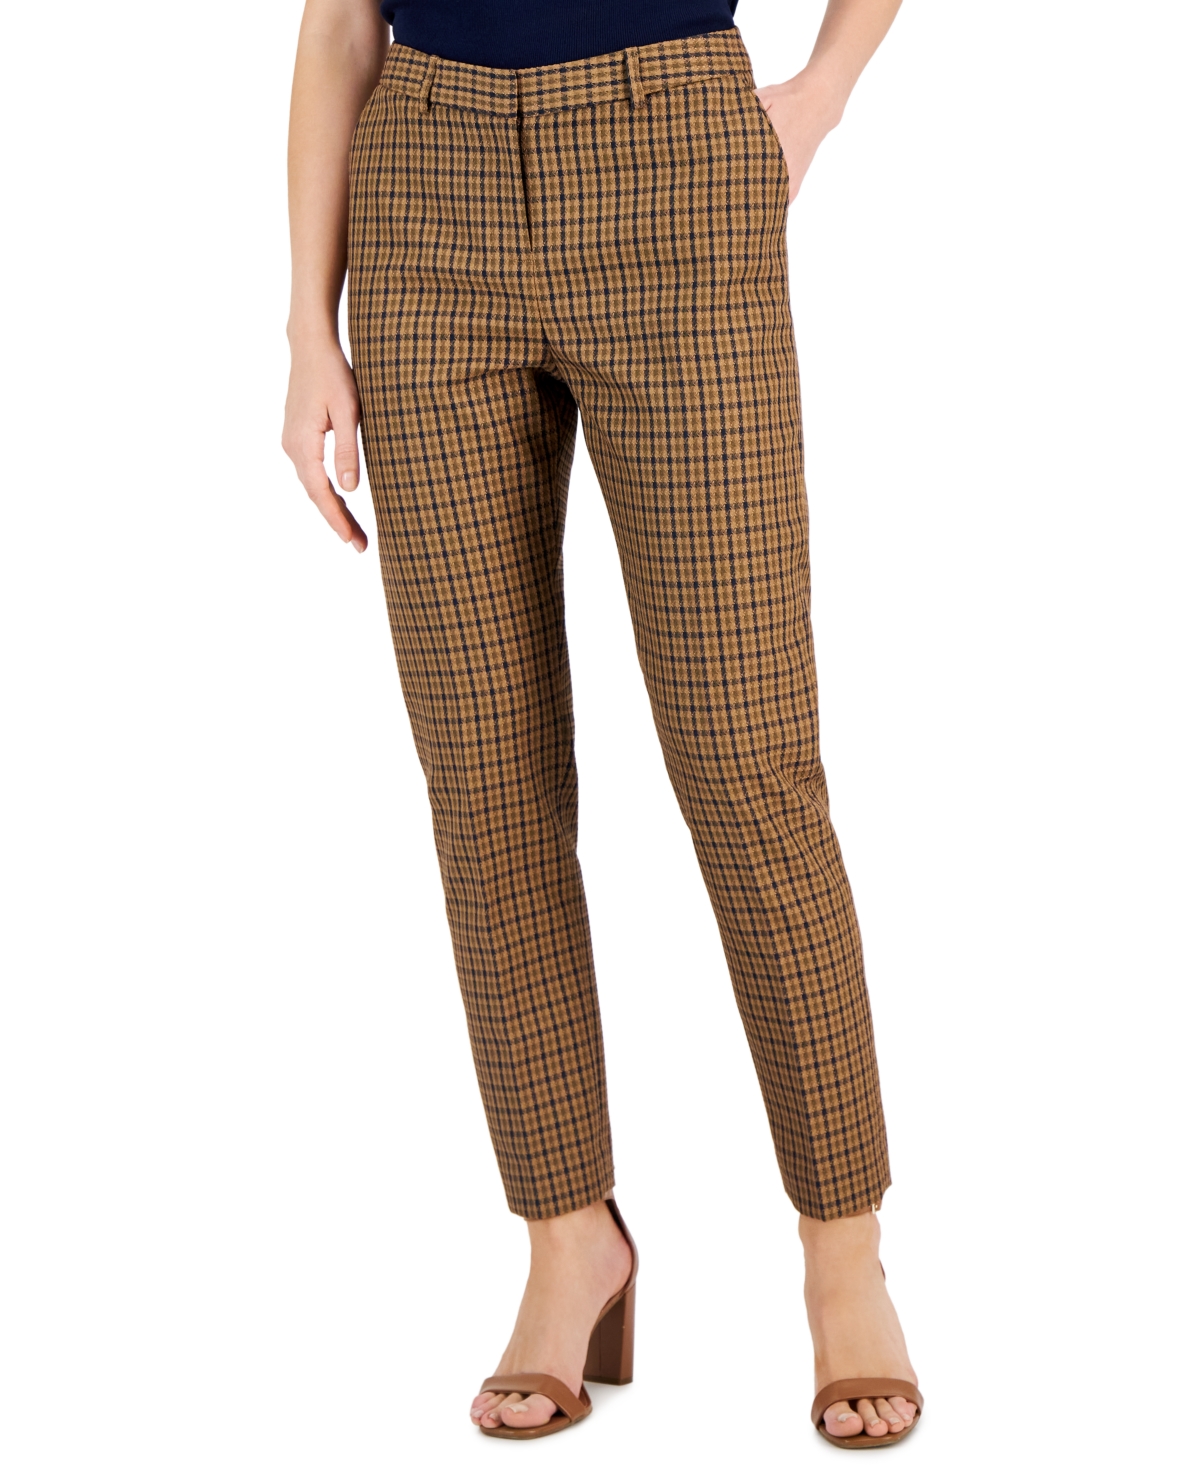 Camel Houndstooth Check Leggings, Trousers